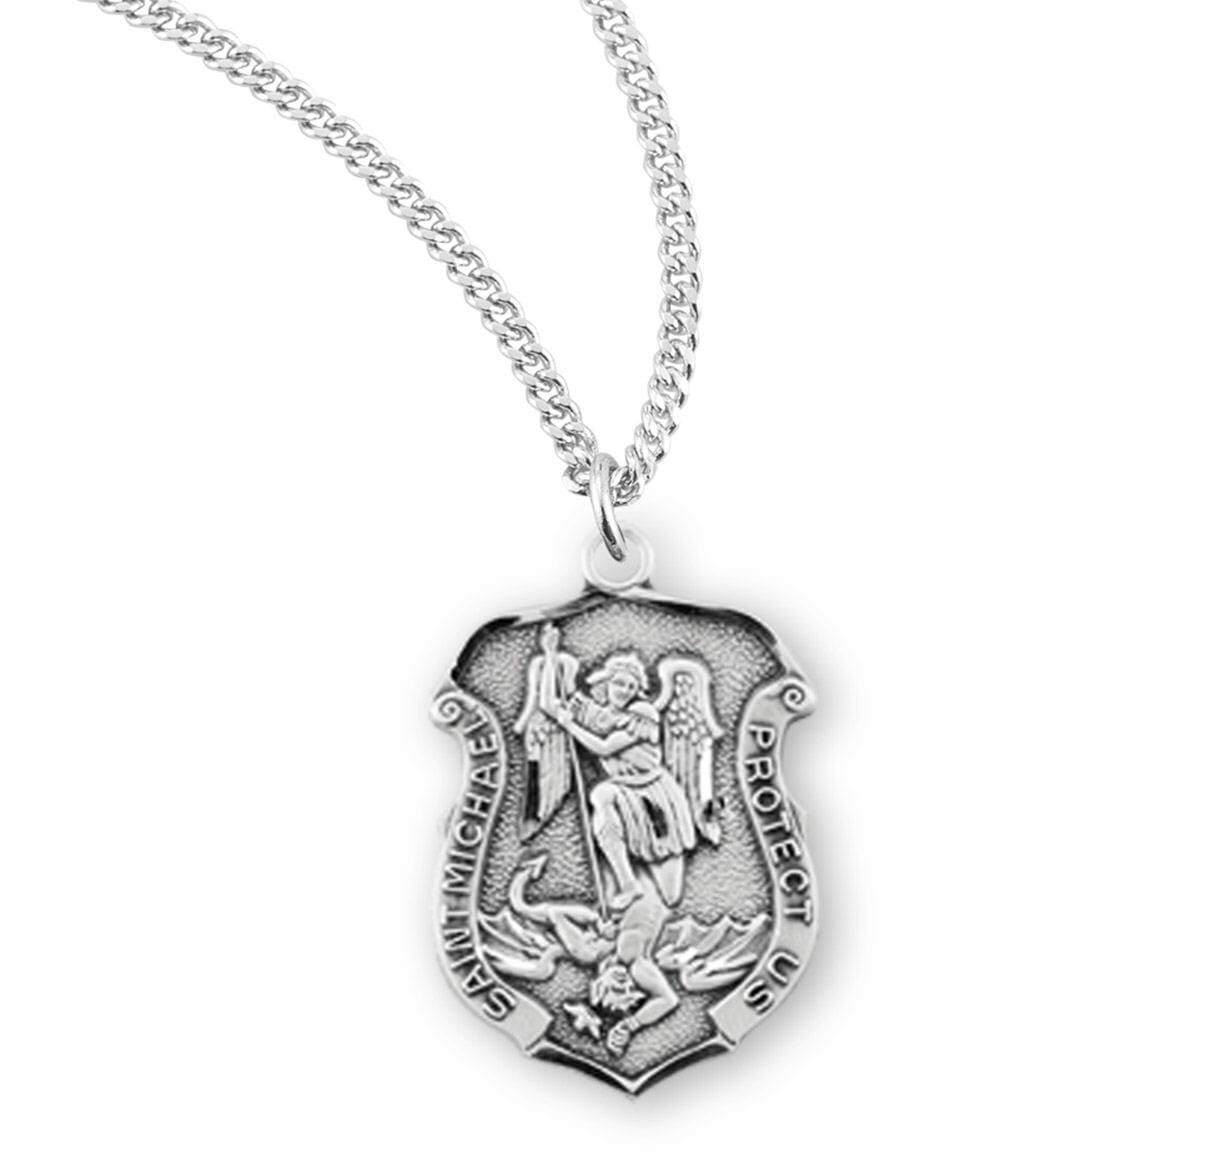 Saint Michael Sterling Silver Badge Medal - Buy Religious Catholic Store